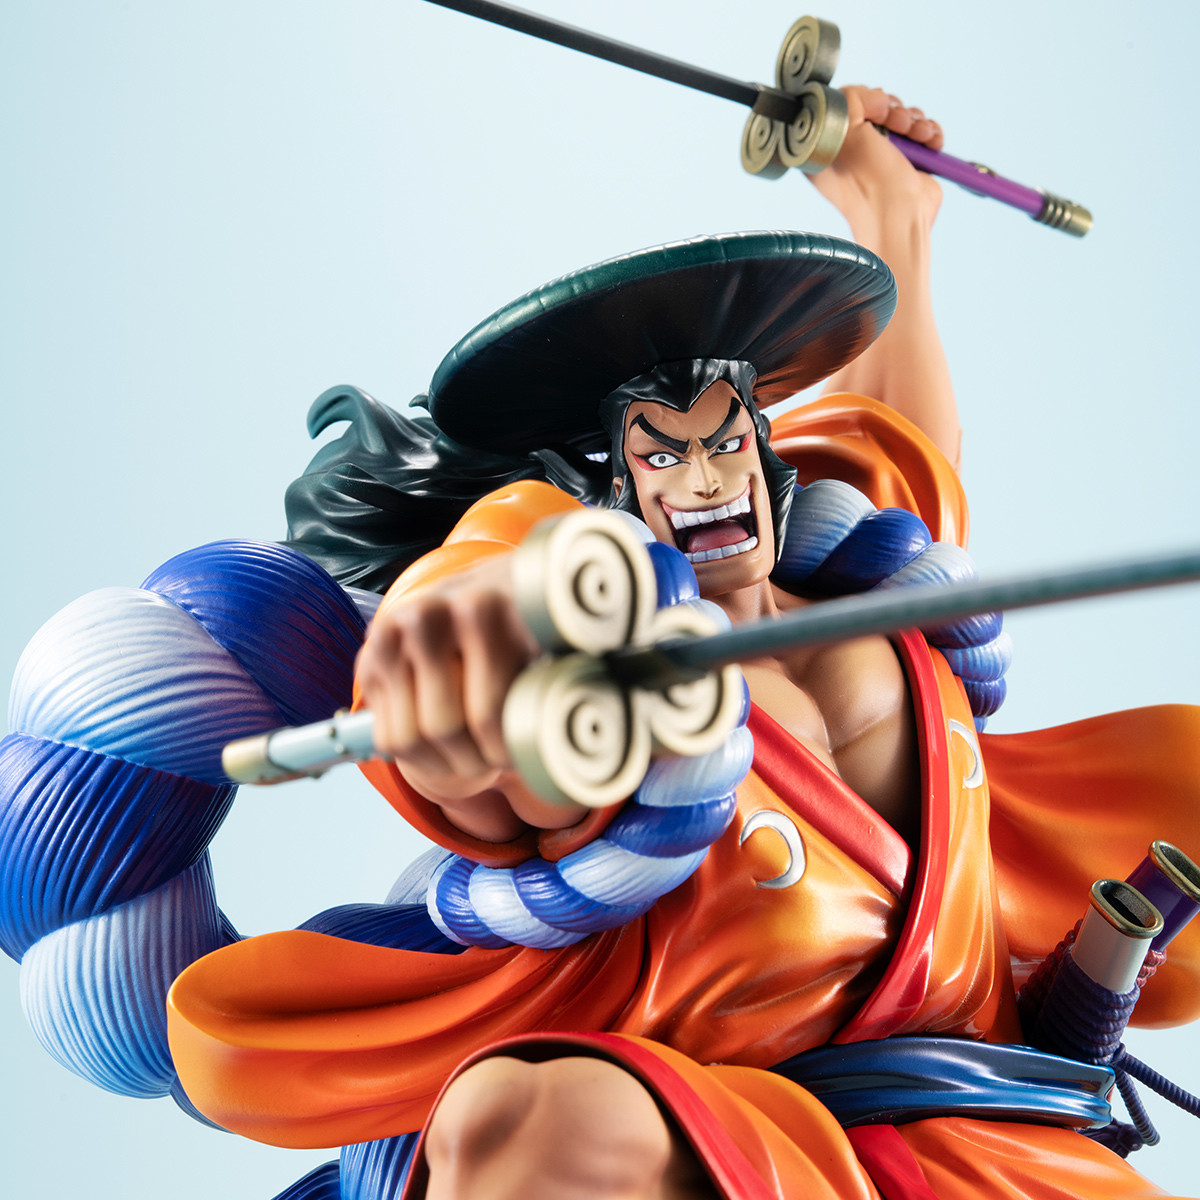 MegaHouse_Oden_Portrait-of-Pirates-Warriors-Alliance_One-Piece-6